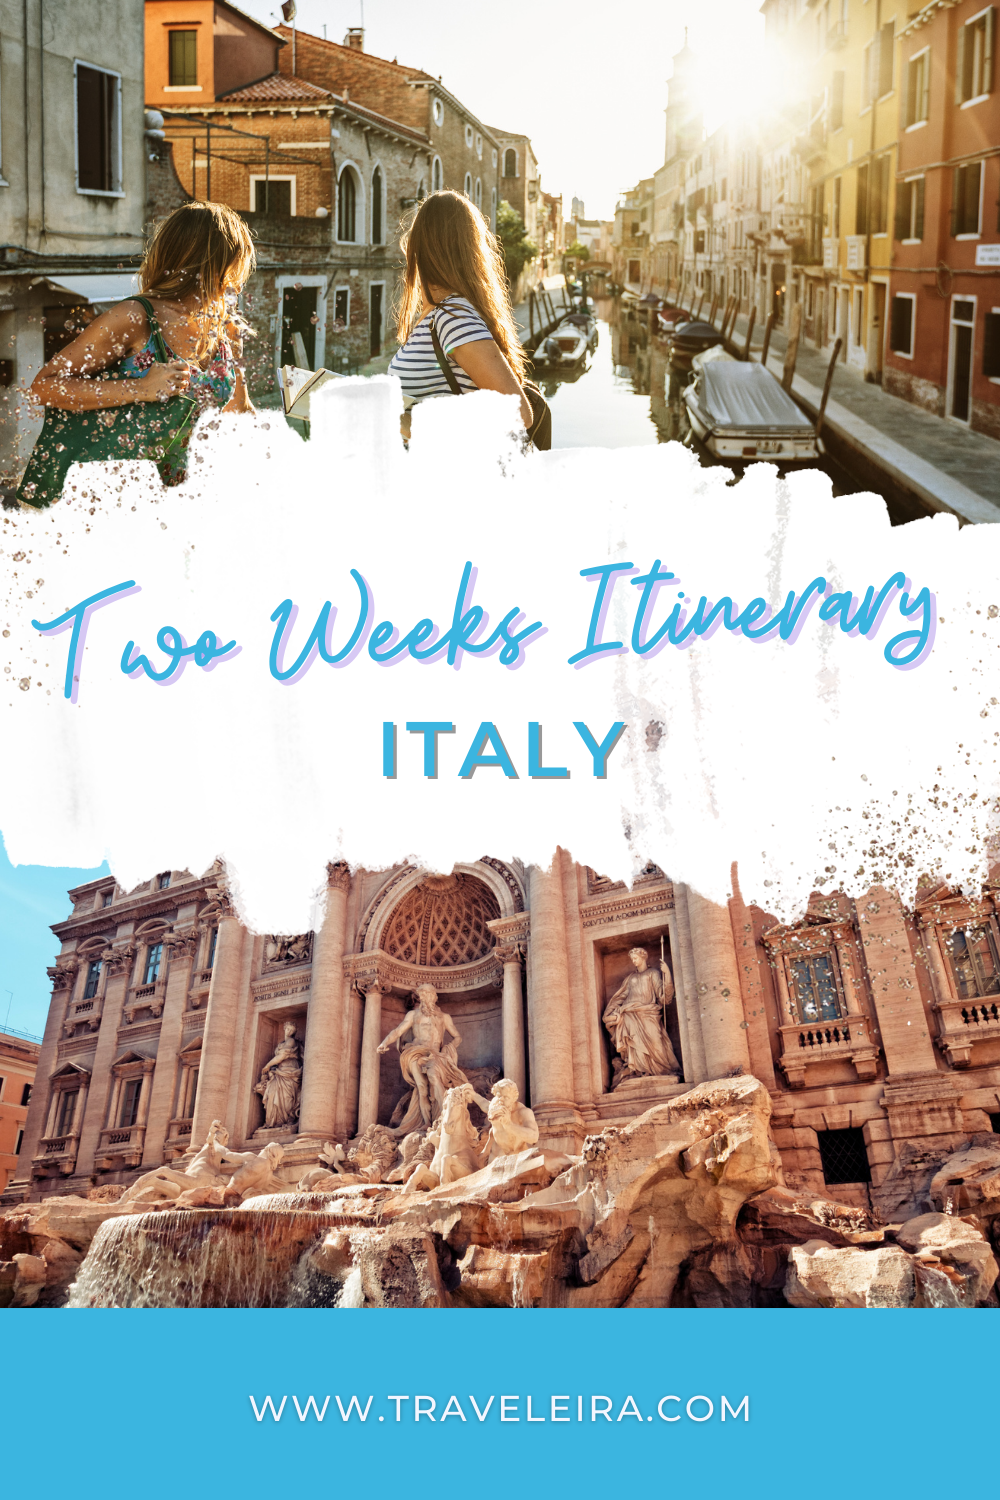 Explore Italy's top destinations with our comprehensive two weeks in Italy itinerary. Make the most of your trip and create unforgettable memories.